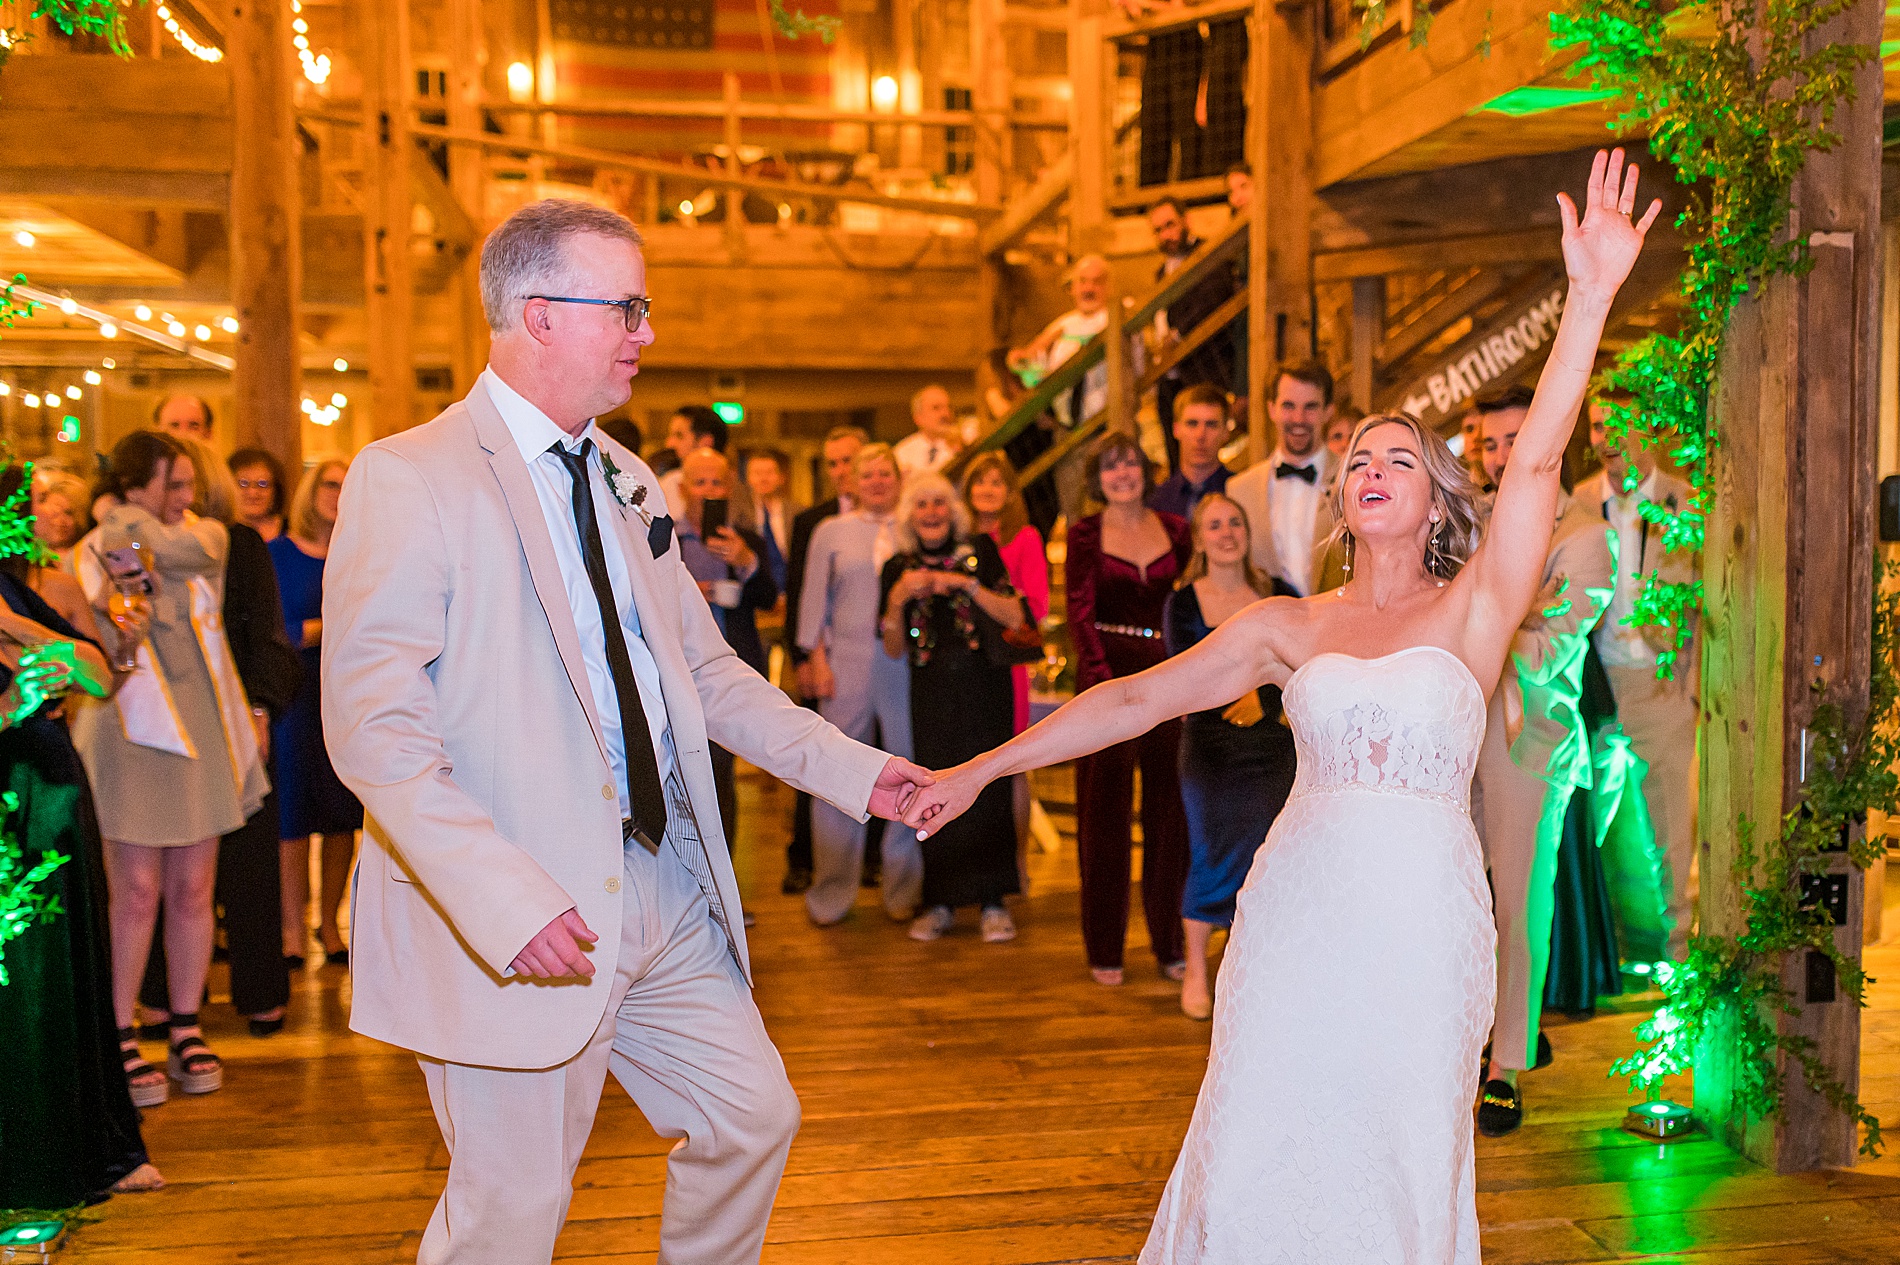 bride and father do fun dance at wedding reception